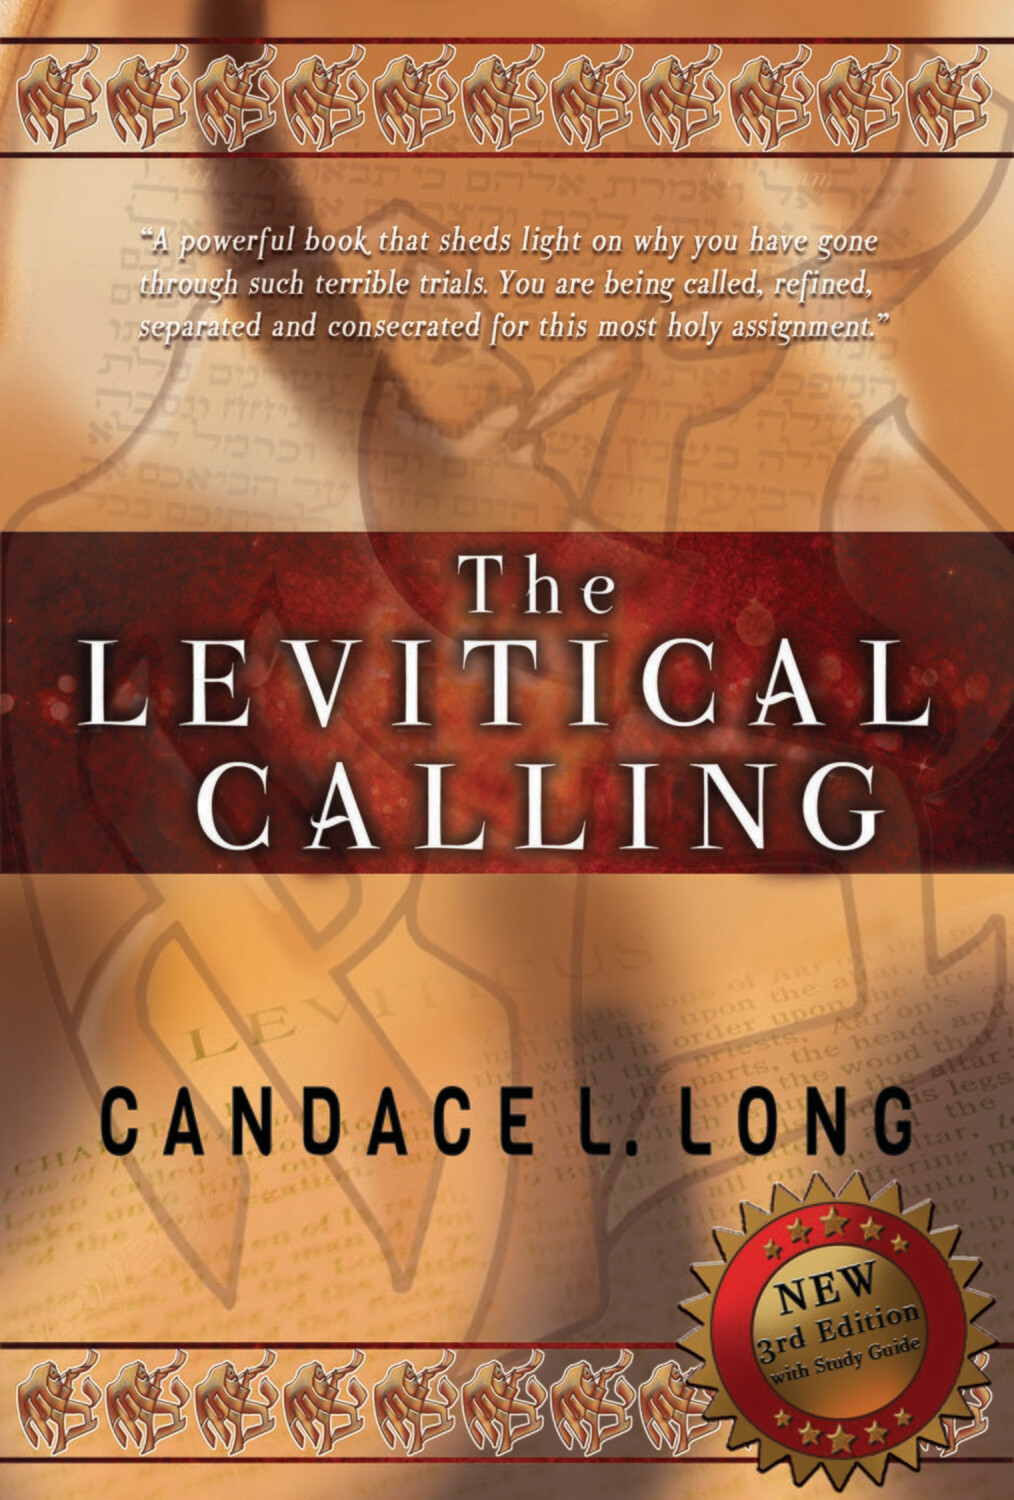 The Levitical Calling